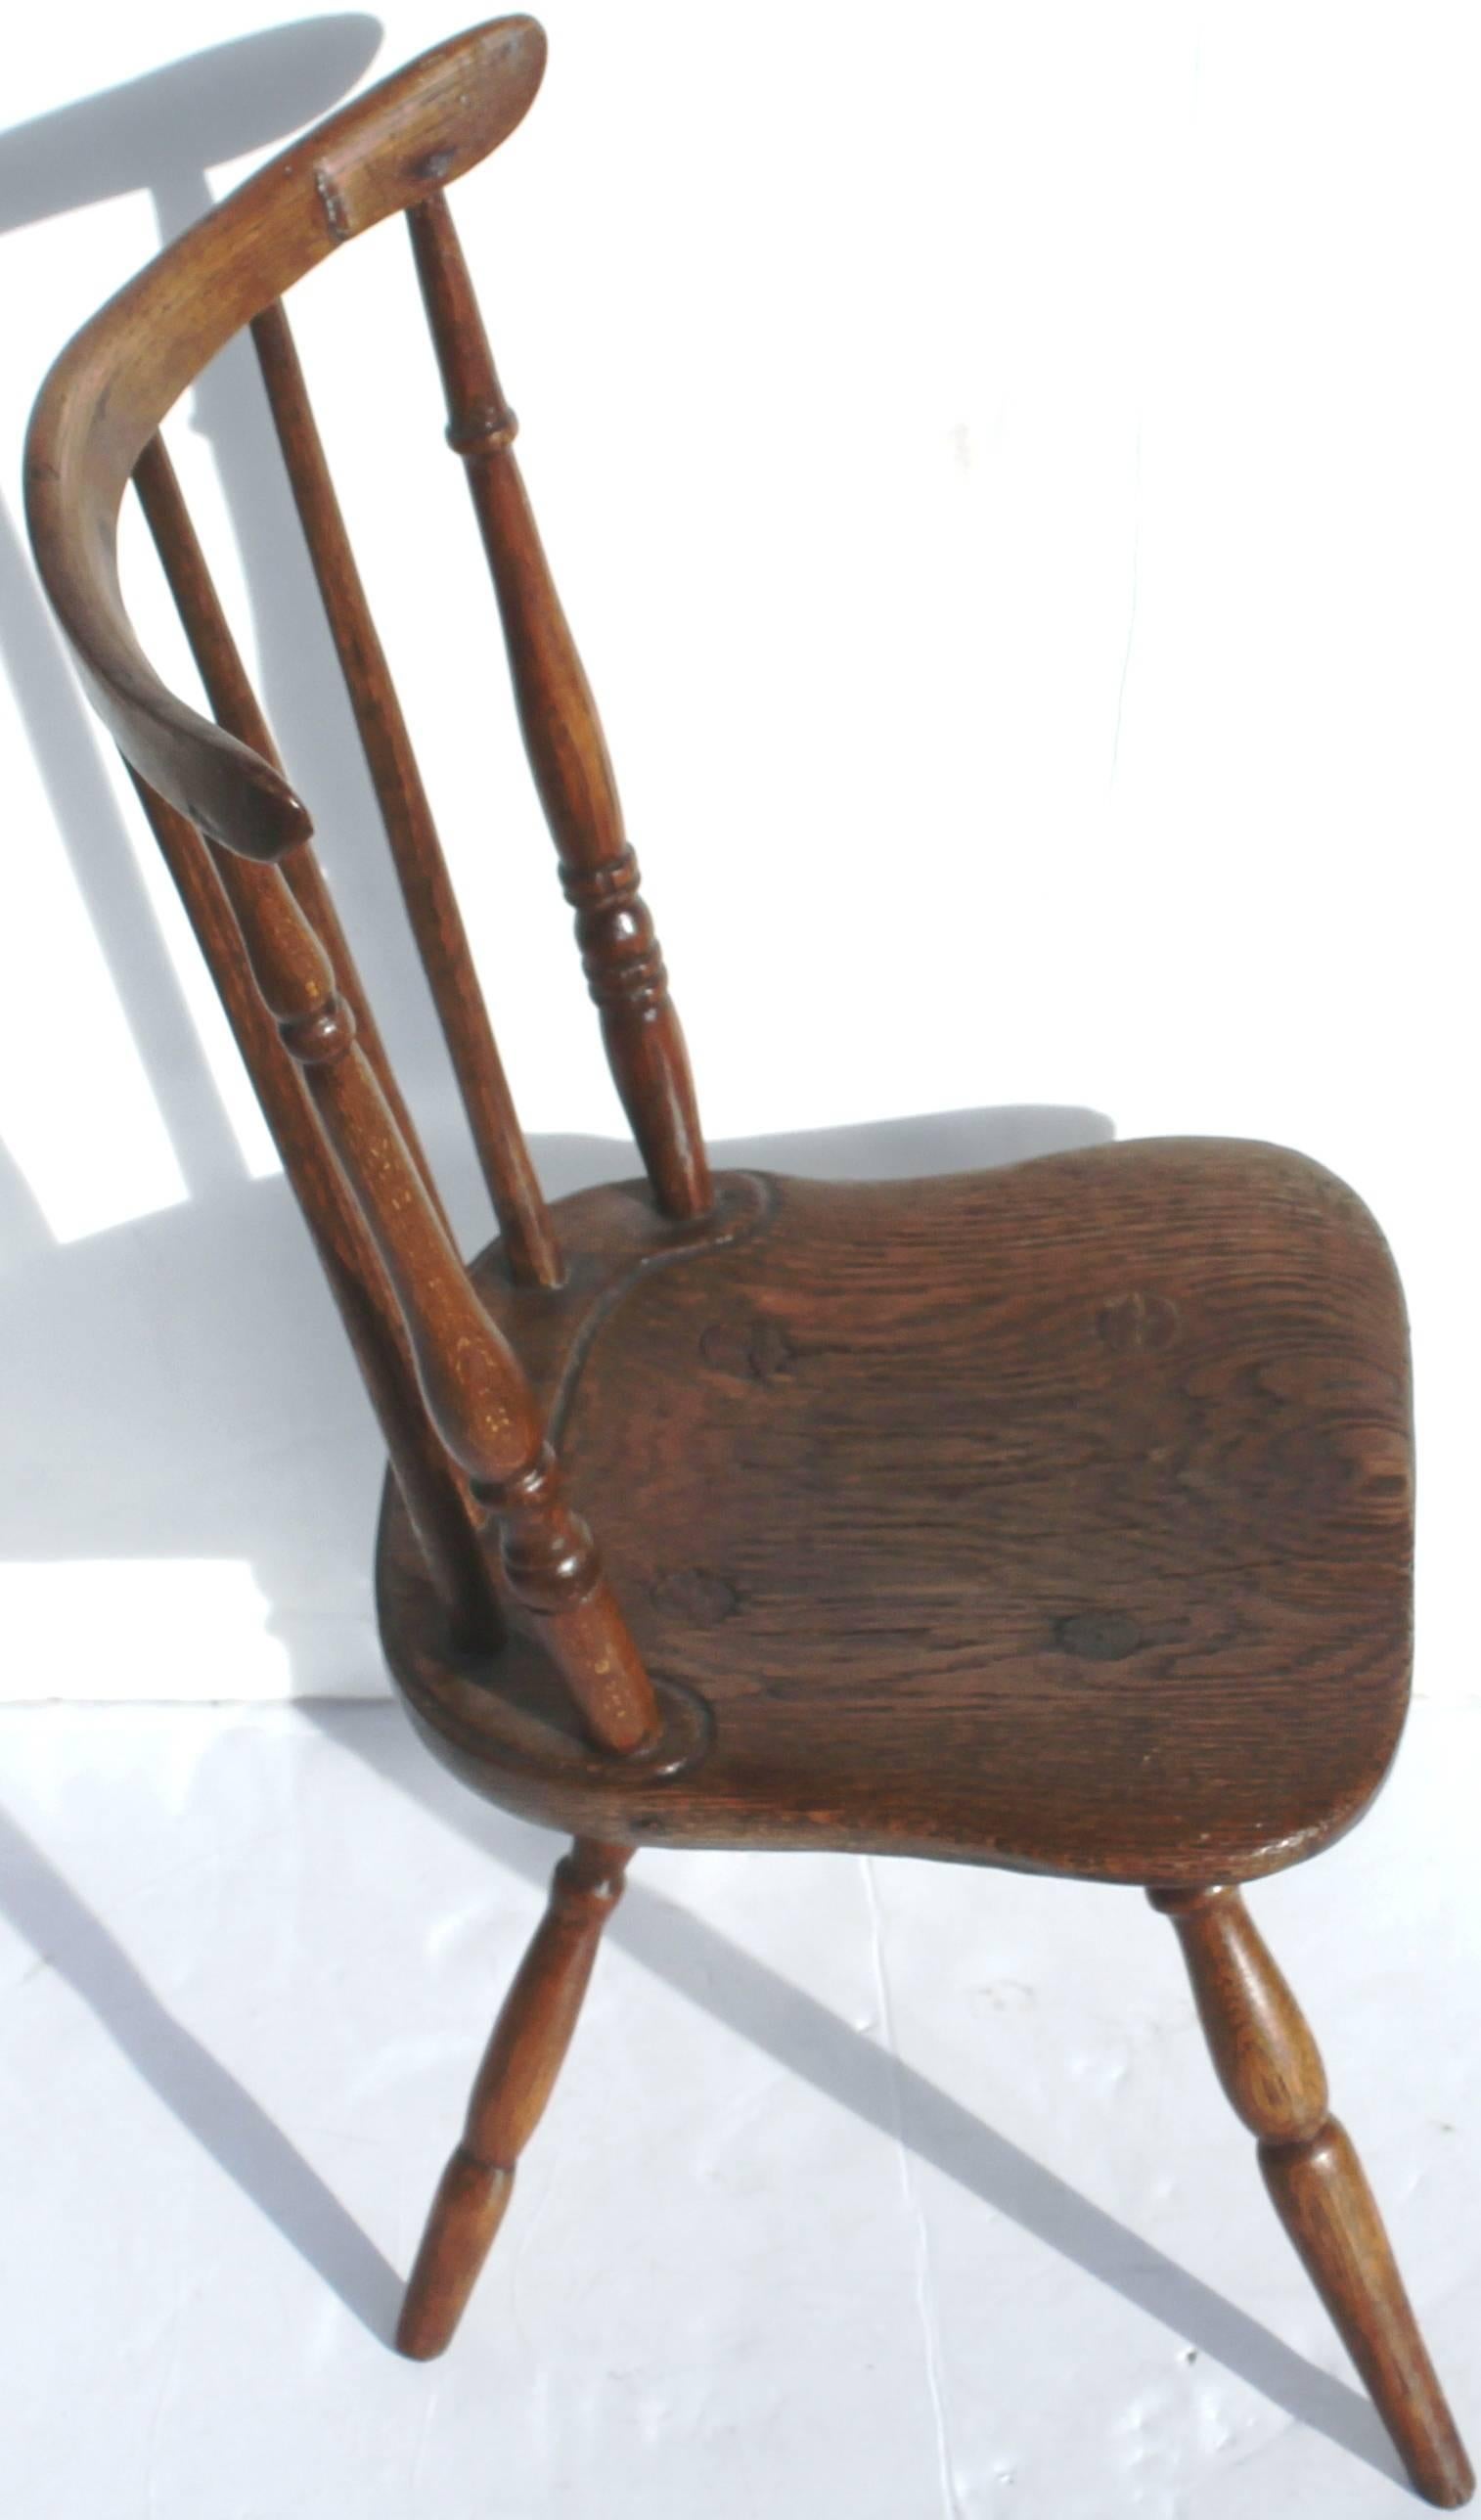 Patinated Early and Rare 19th Century Rare Child's Windsor Chair For Sale